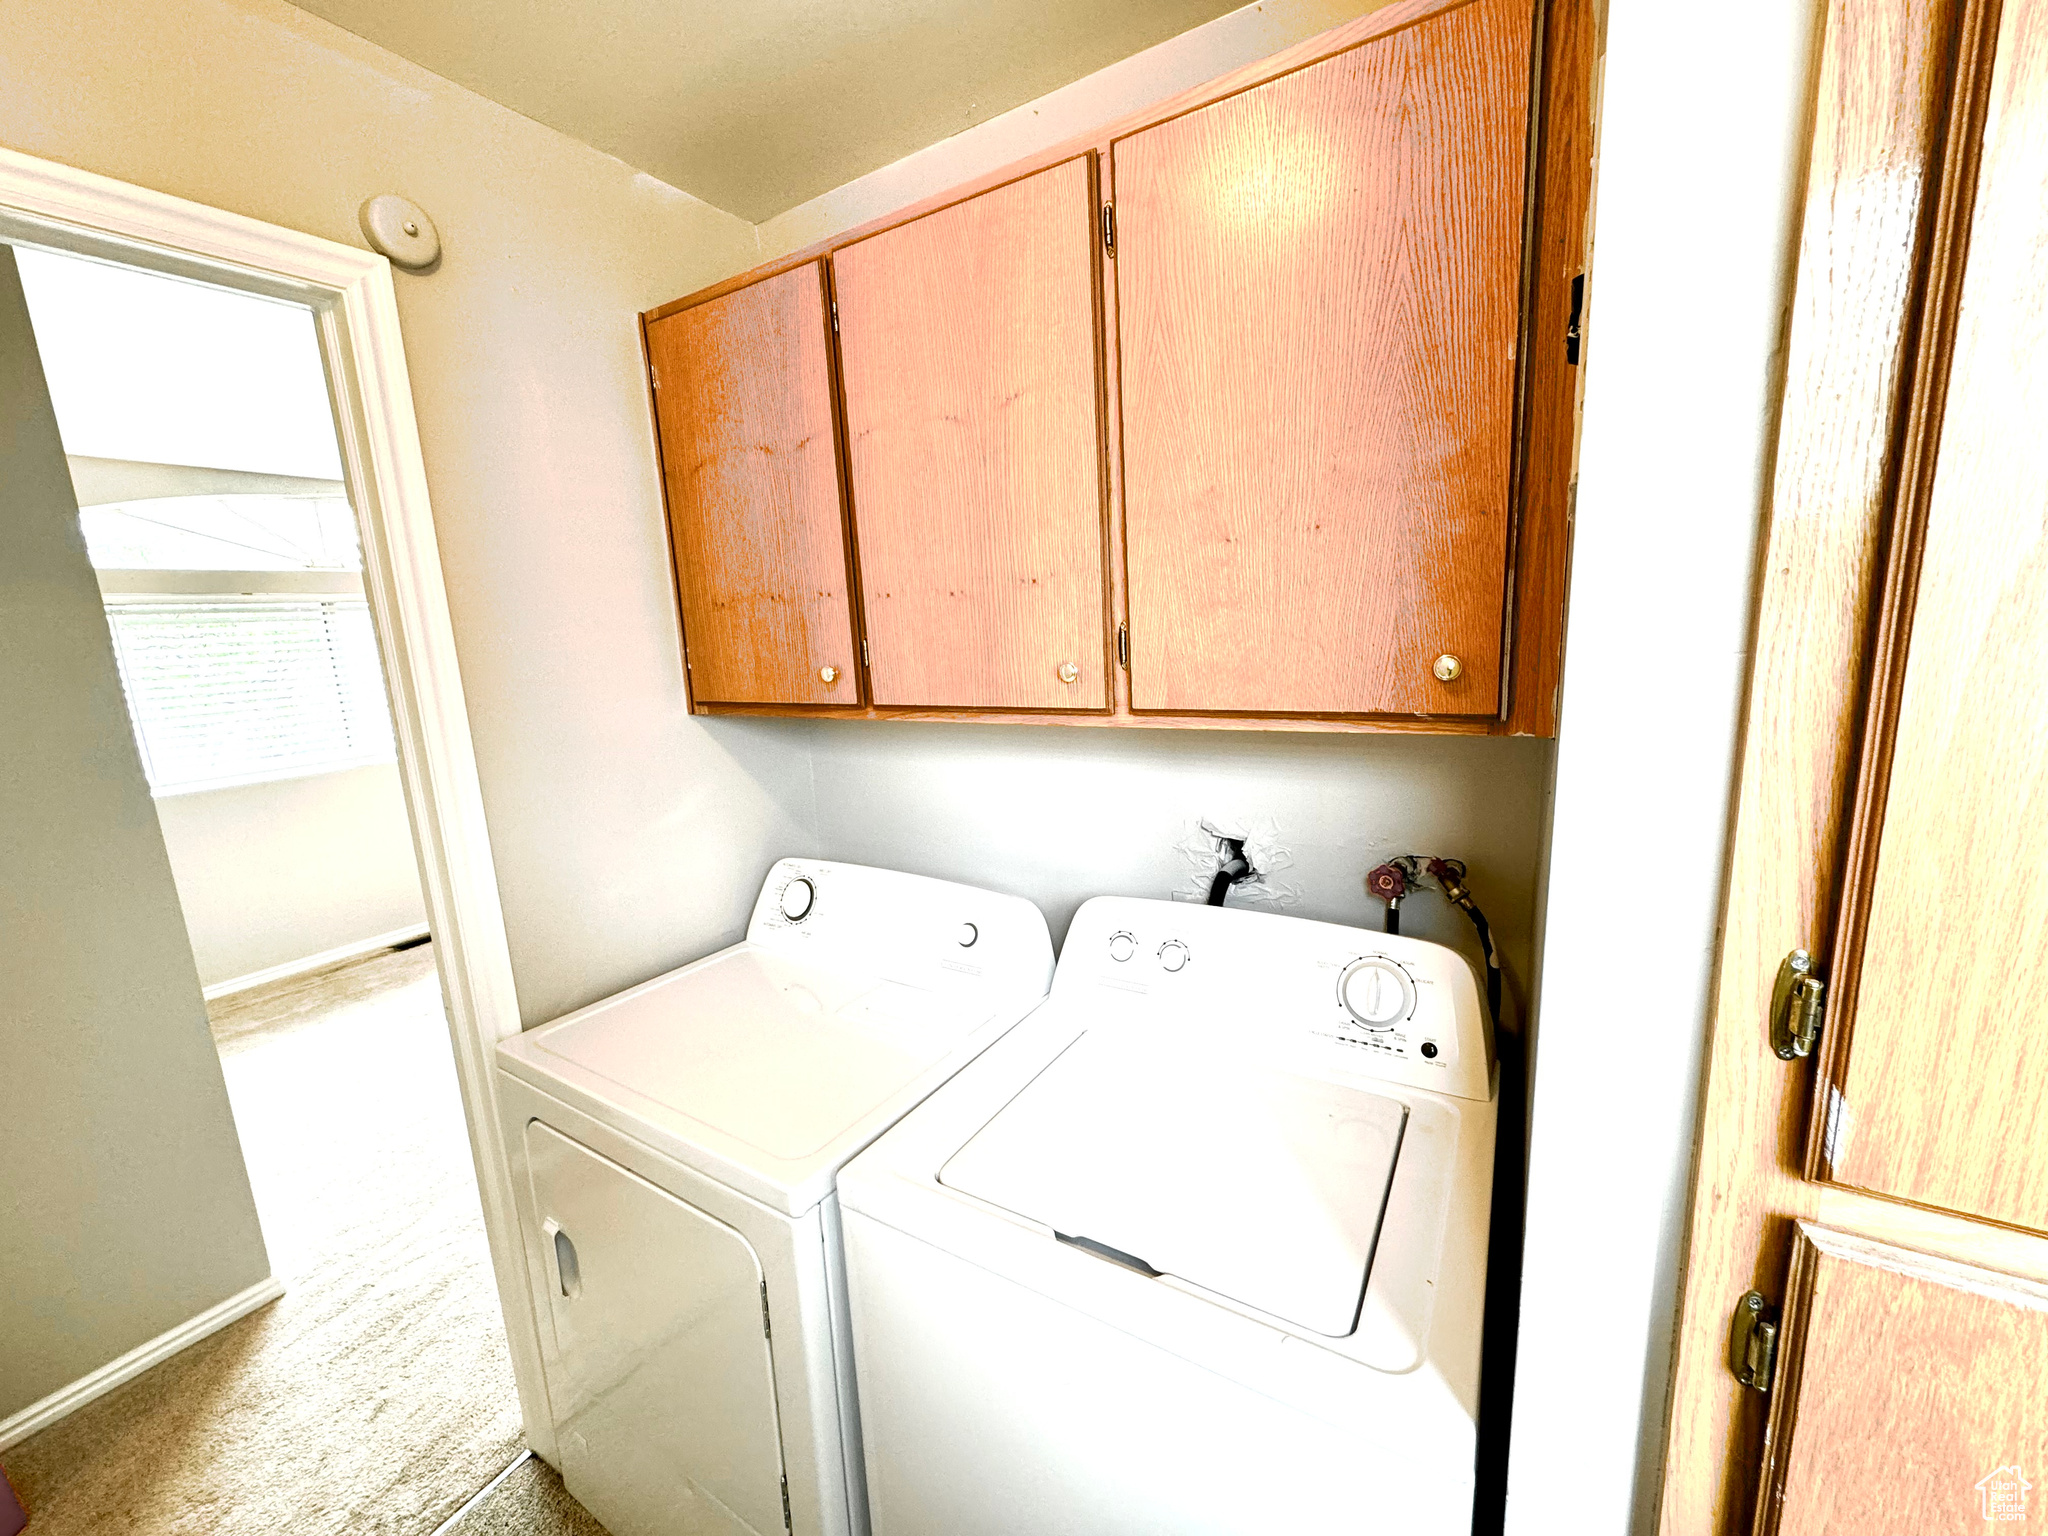 Clothes washing area with cabinets, independent washer and dryer, washer hookup, and carpet flooring